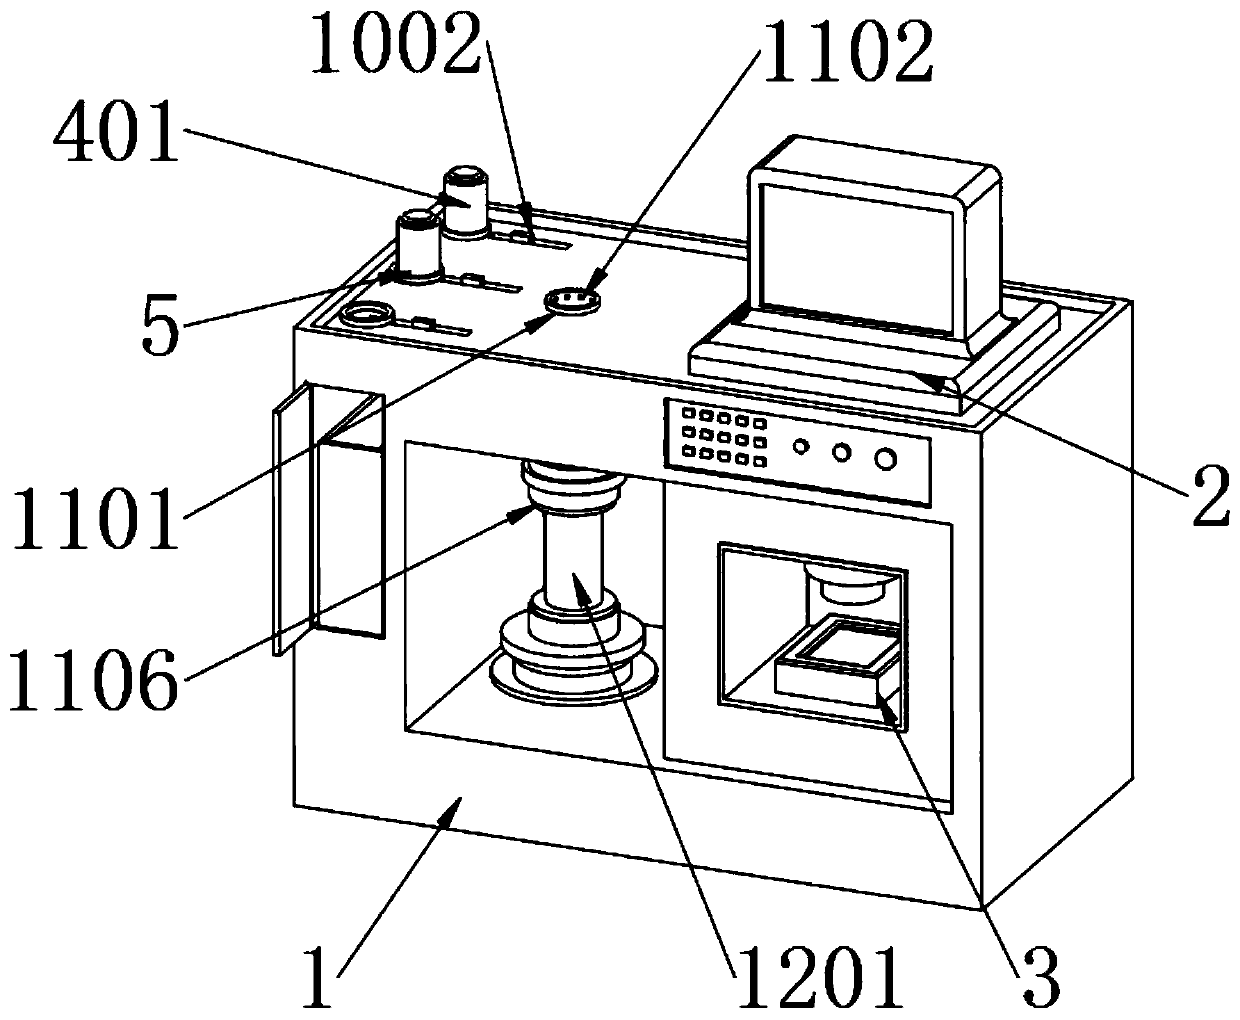 Integrated apparatus for tumor cell detection and extraction